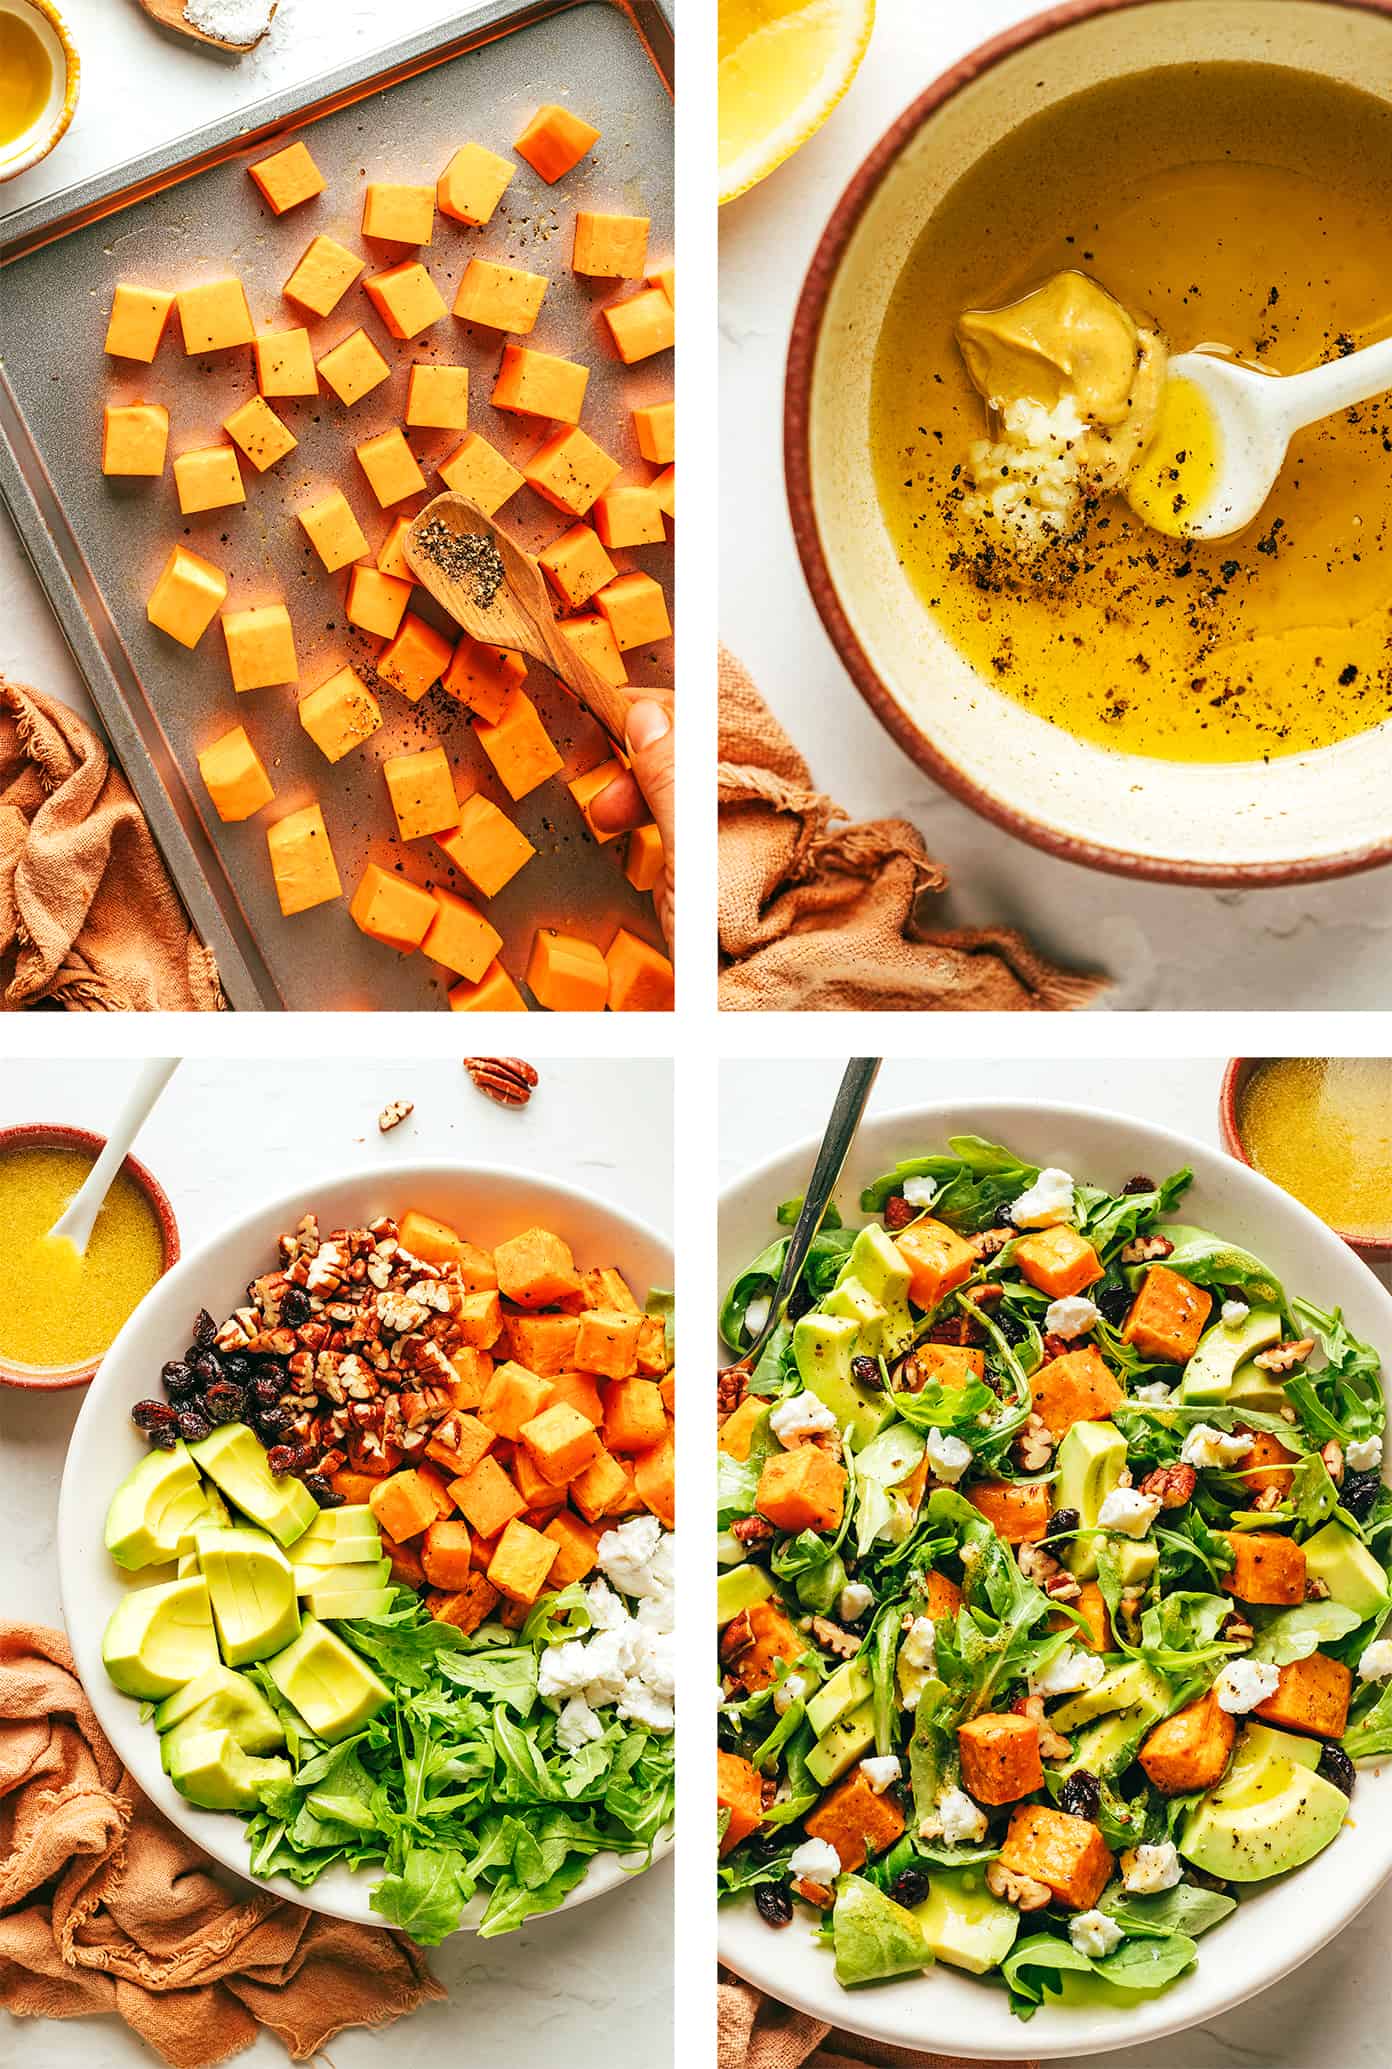 Step-by-step instructions for your favorite fall salad